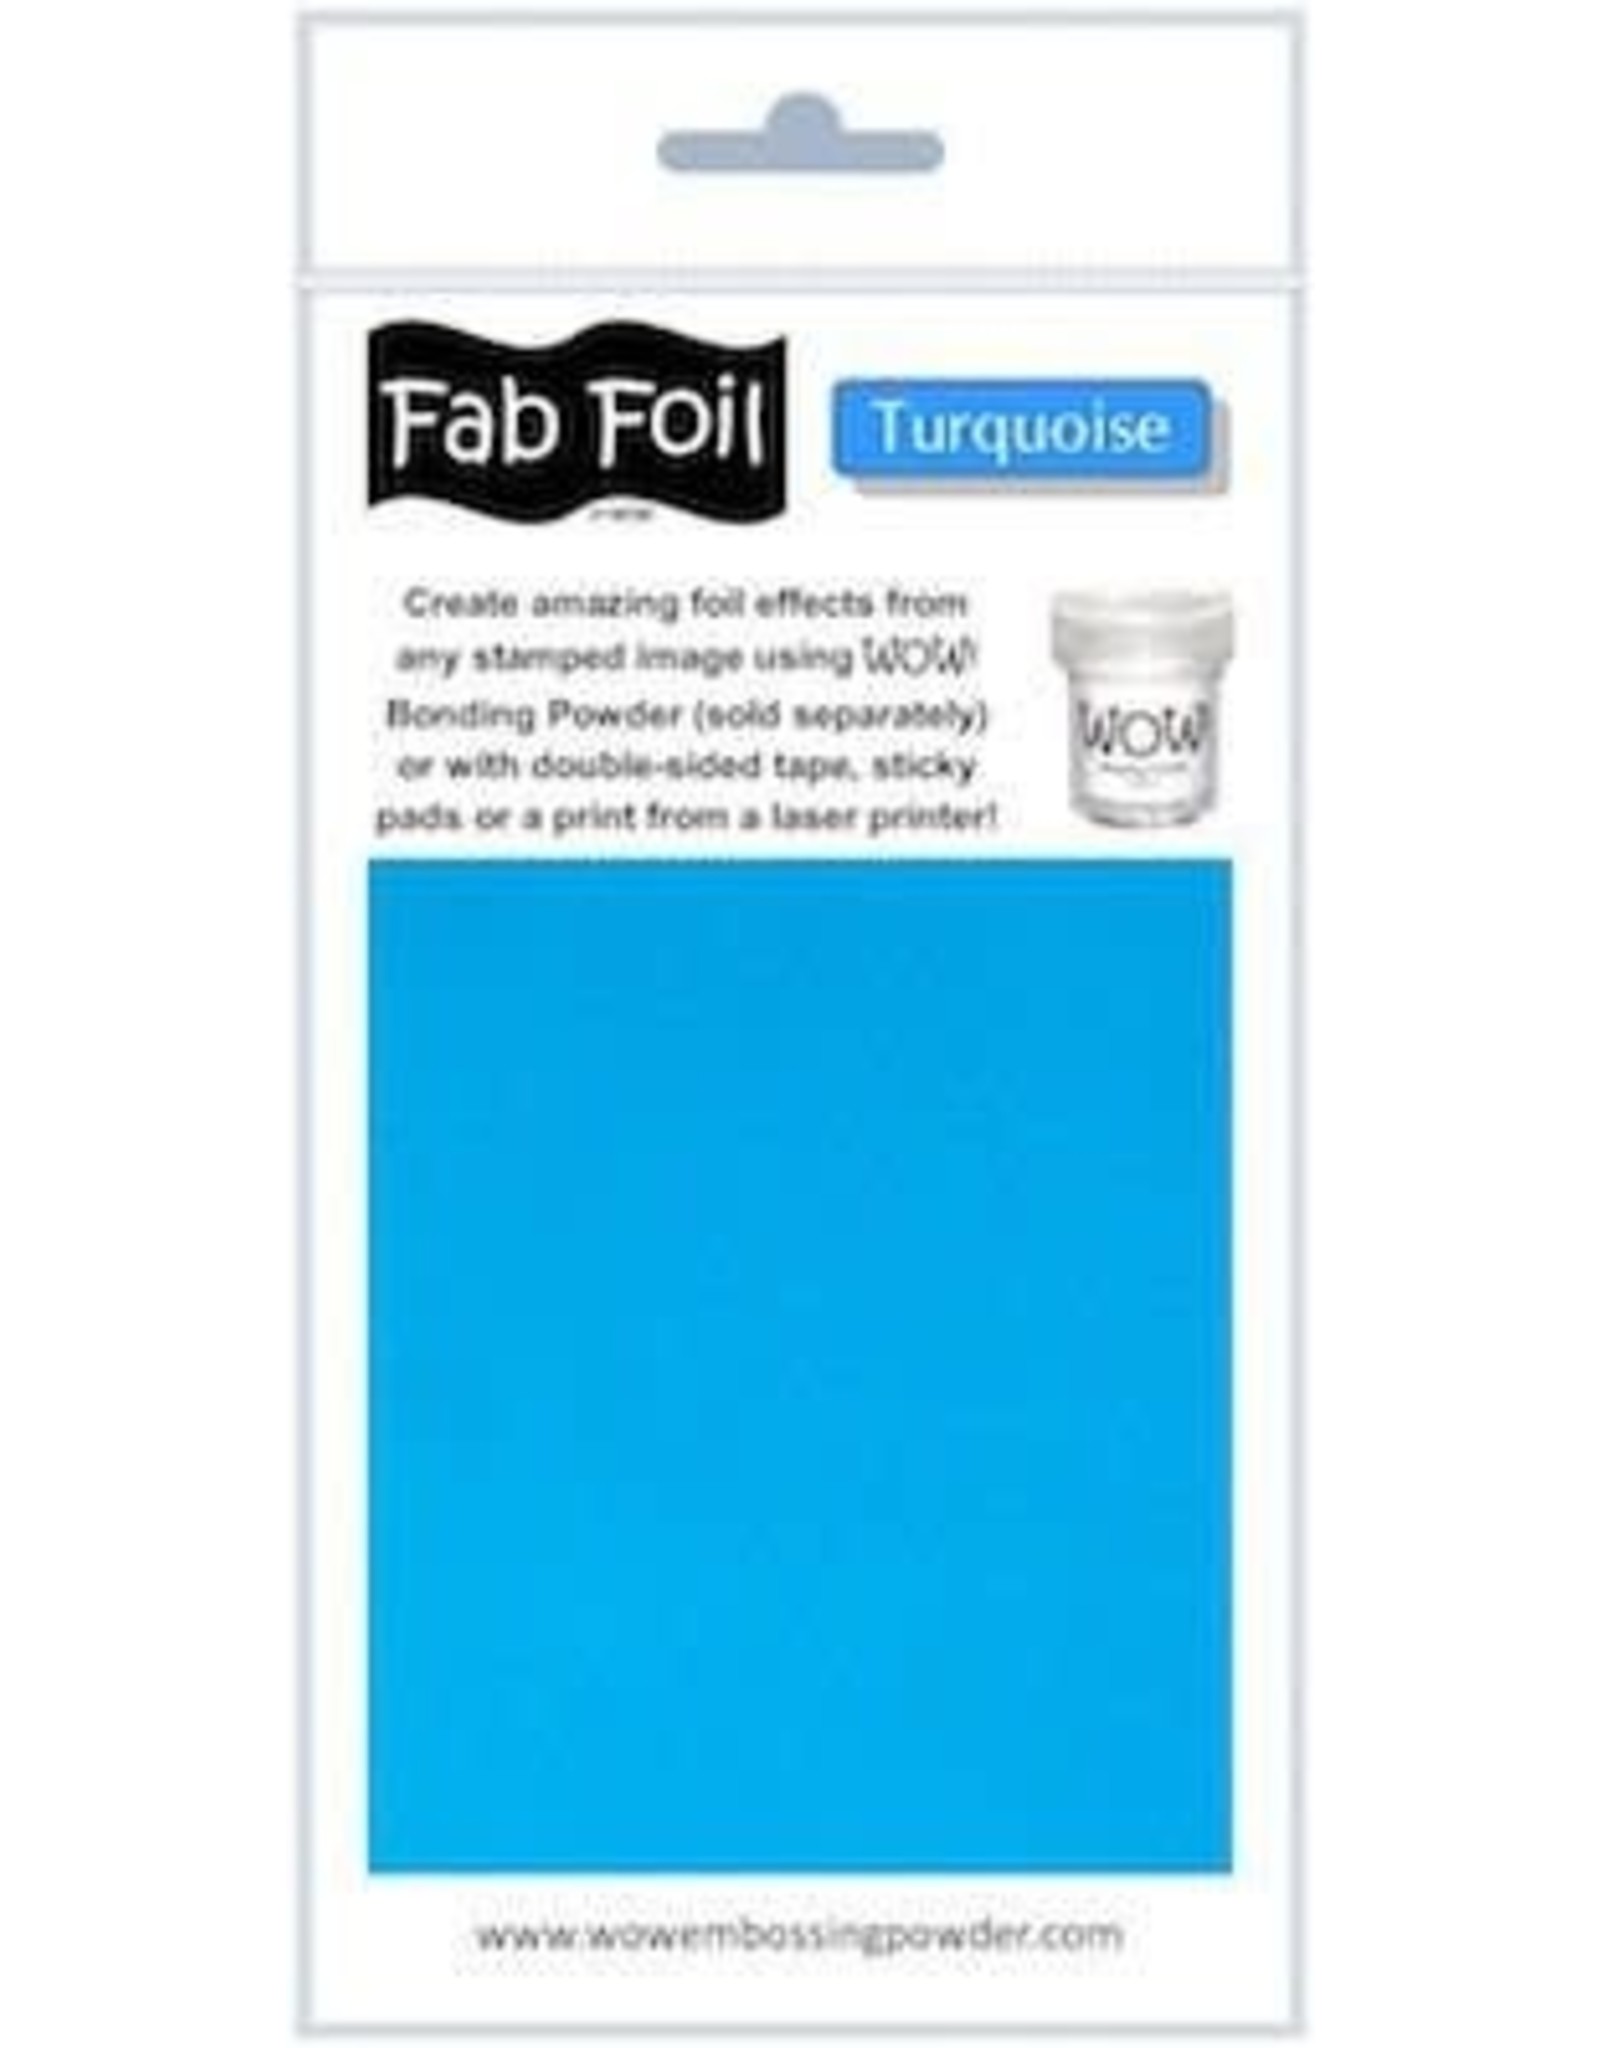 WOW! WOW! TURQUOISE FAB FOIL